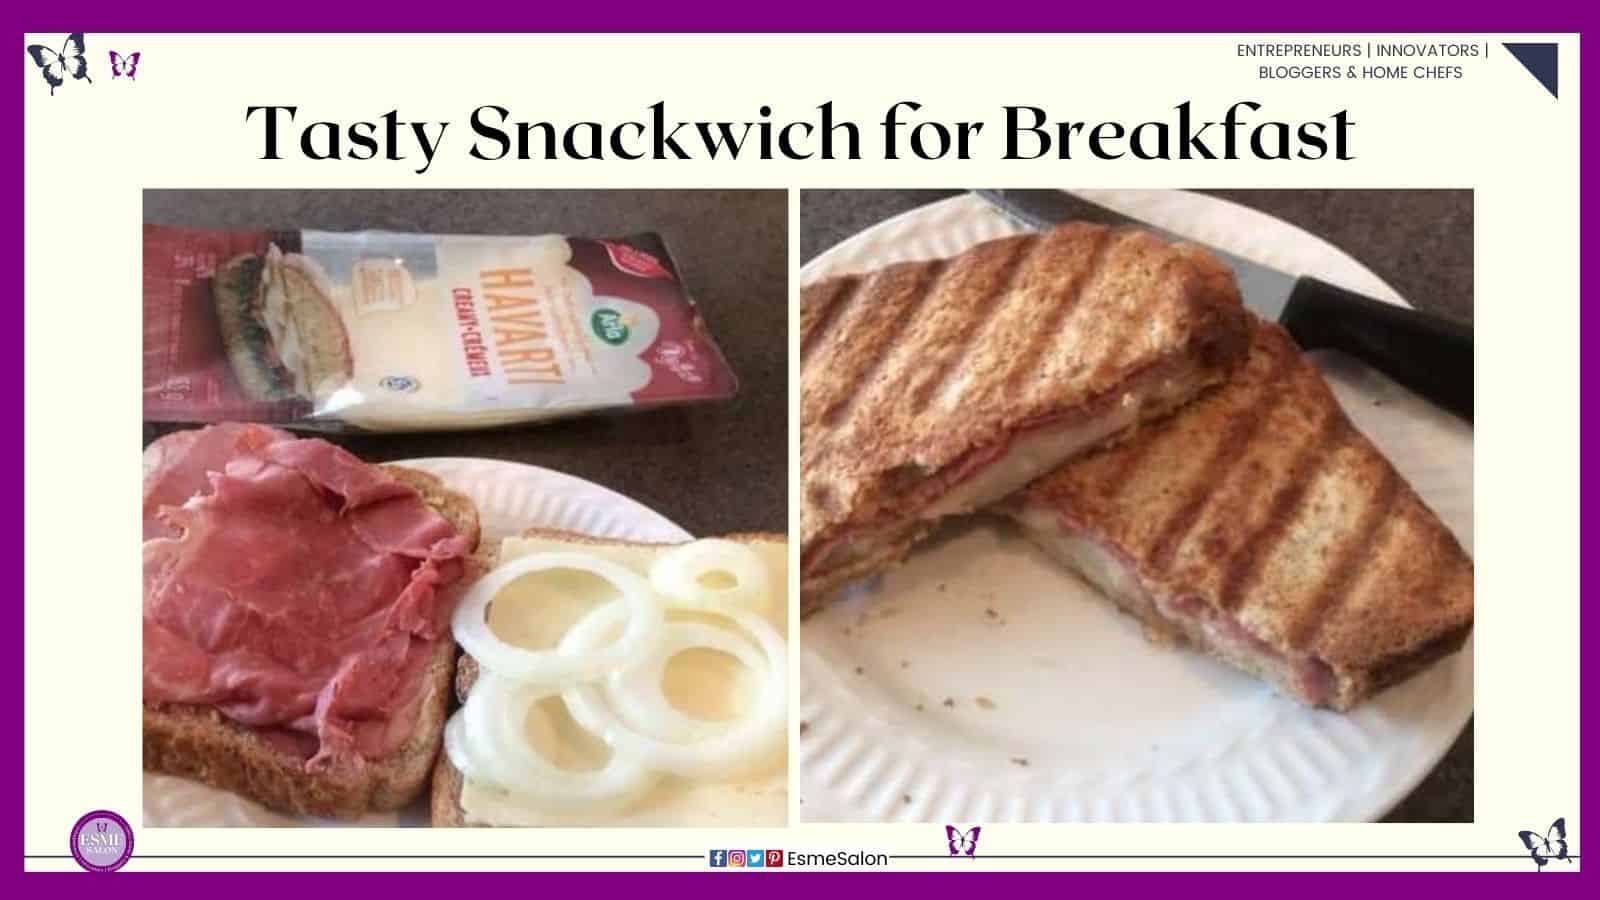 an image of an open sandwich with corned beef, onion and cheese on the side on a white side plate as well as an already toasted Snackwich for Breakfast